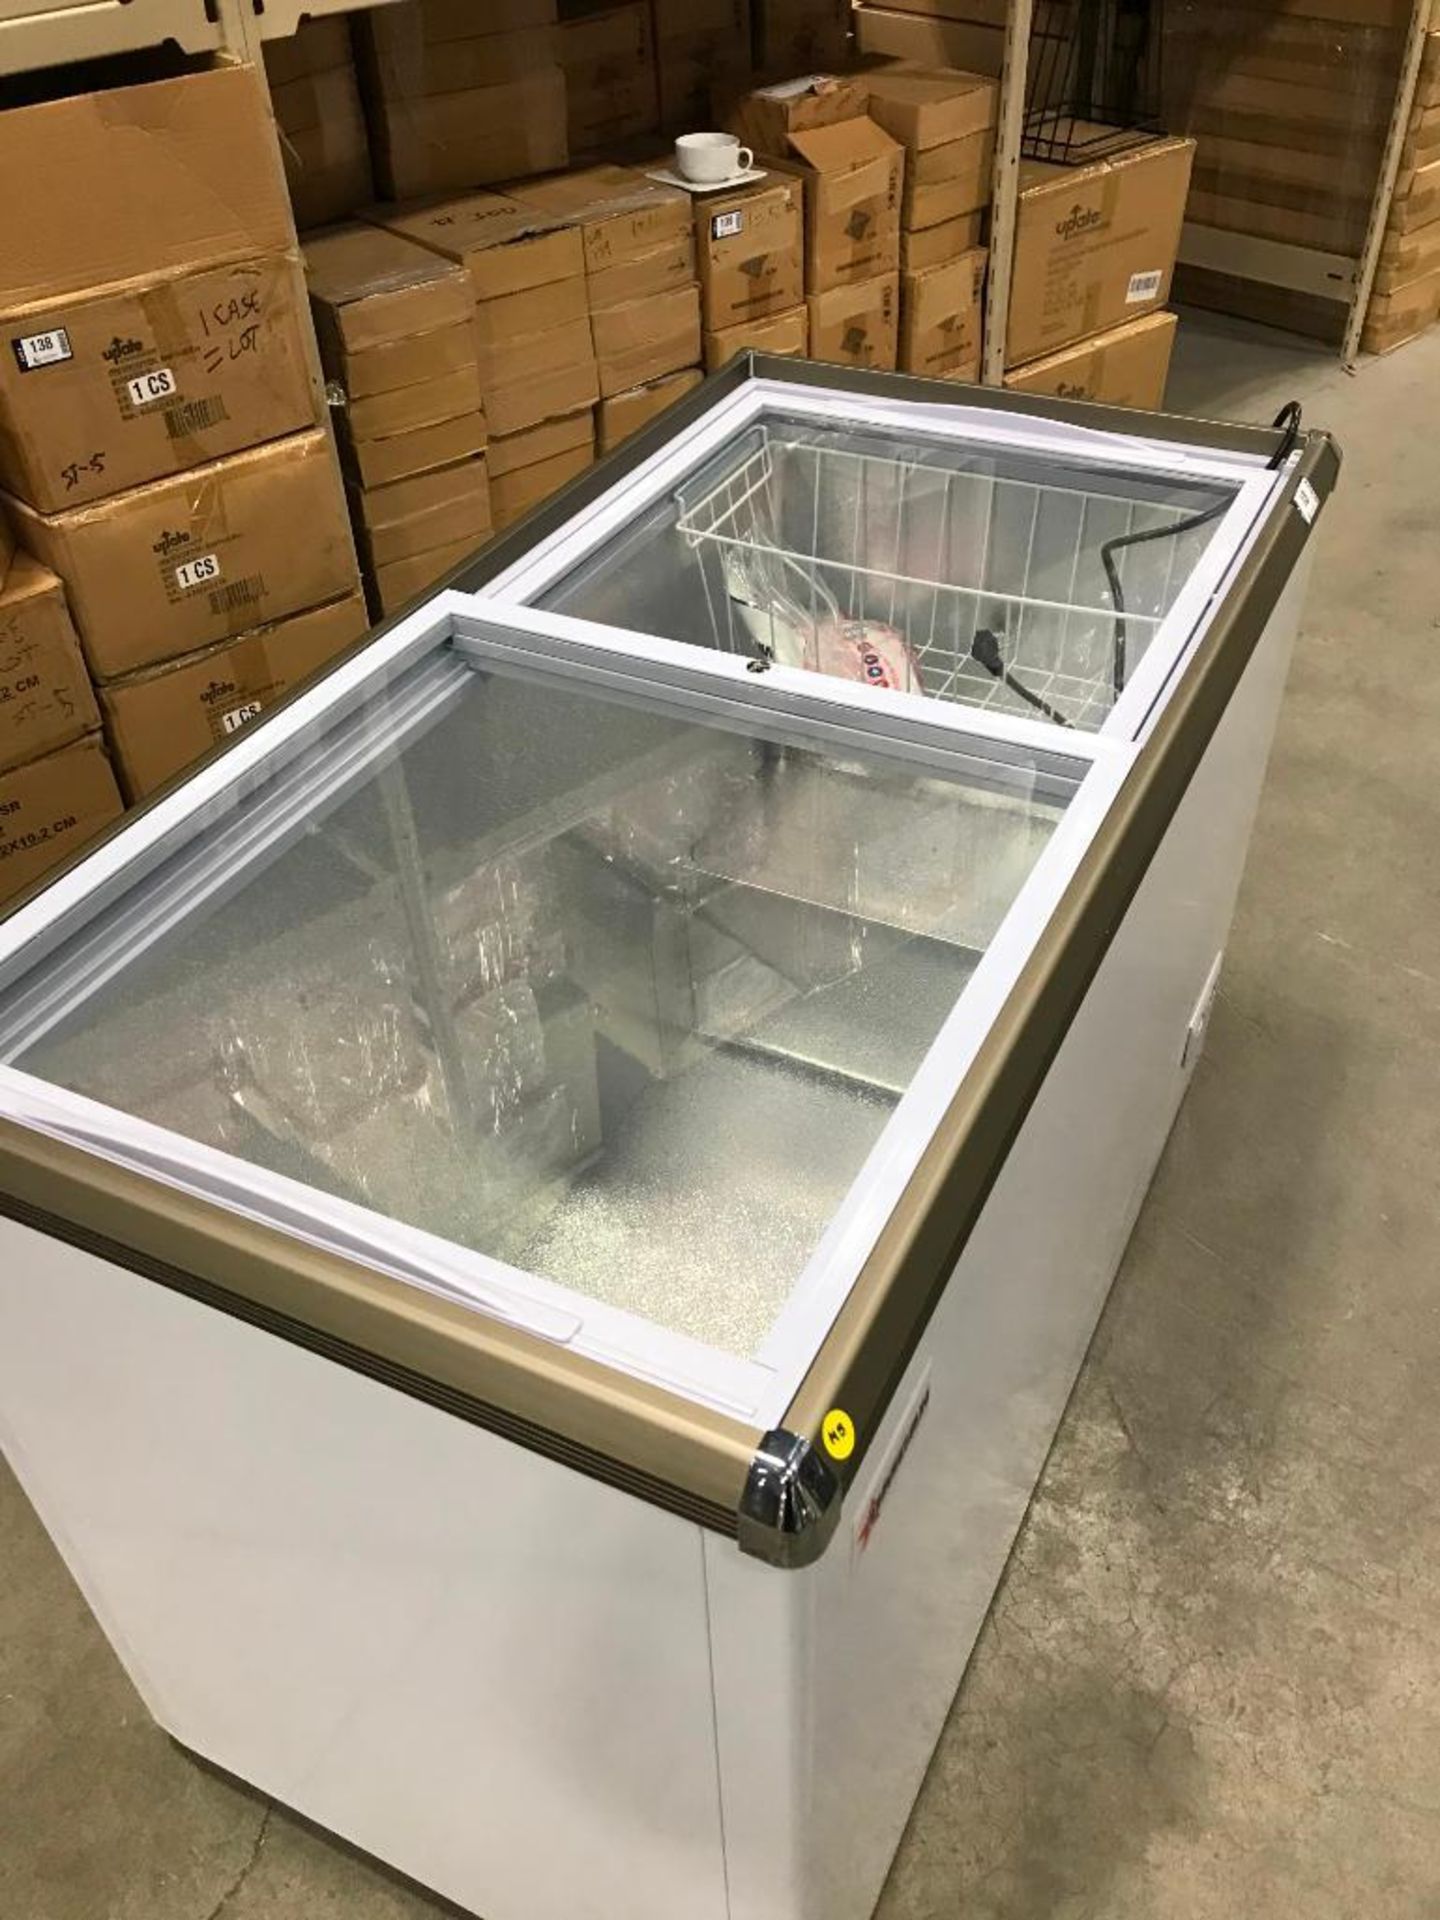 45.7" ICE CREAM DISPLAY CHEST FREEZER WITH FLAT GLASS TOP - OMCAN 45293 - Image 3 of 9